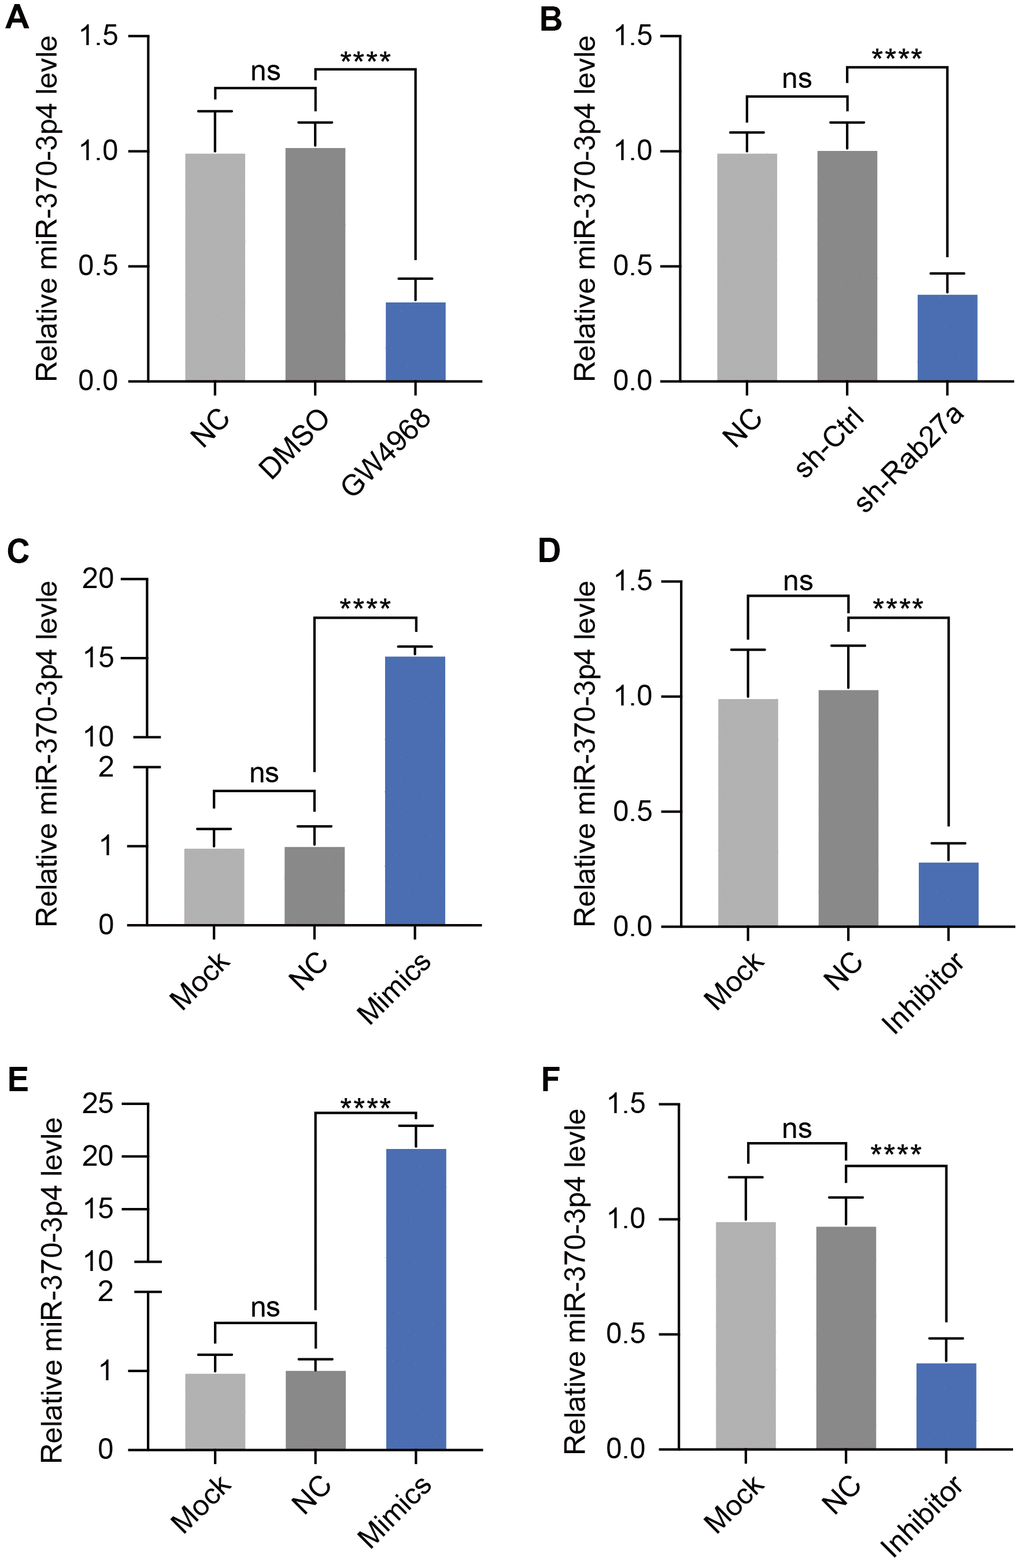 GW4968 and Rab27a silencing down-regulate miR-370-3p in cerebral MVs. (A) Following co-culture with exosomes treated with GW4869, miR-370-3p was analyzed in bEND.3 cells. (B) After Rab27a silencing, miR-370-3p levels in bEND.3 cells were tested by qPCR. (C, D). miR-370-3p levels in bEND.3 cells were measured via qPCR following miR-370-3p mimic or inhibitor treatment. (E, F) Cerebral MVs from I/R rats were collected and then transfected with miR-370-3p mimic or inhibitor. miR-370-3p expression in exosomes from these cells then being assessed via qPCR. ns, not significant, ** p